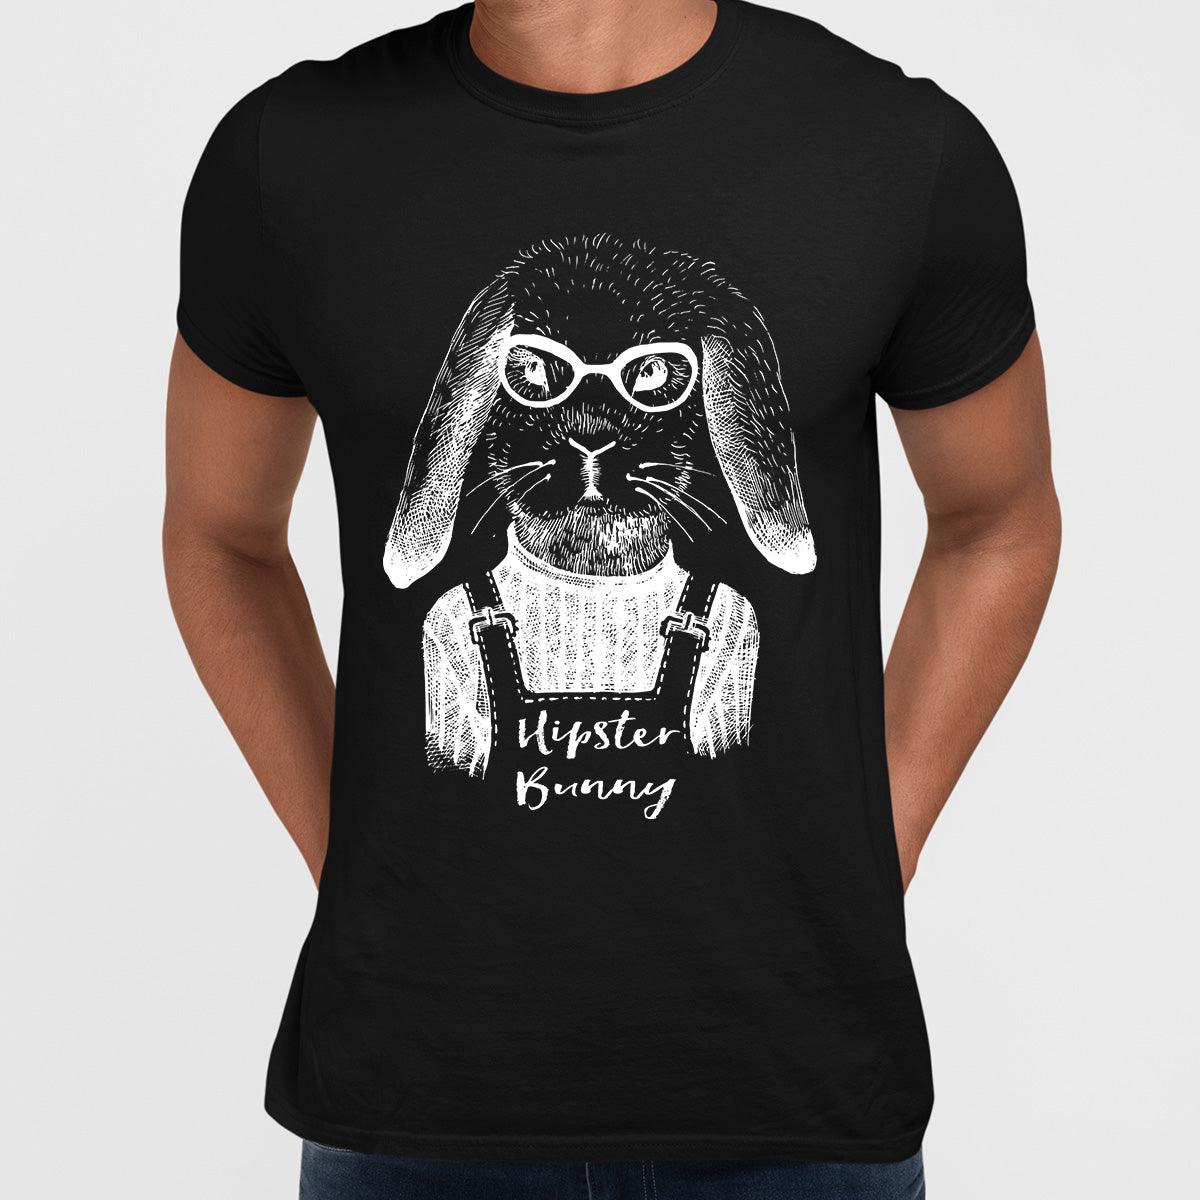 Funny Hipster Bunny Hand Drawn Animal T-shirt Available in Grey White & Black - Kuzi Tees